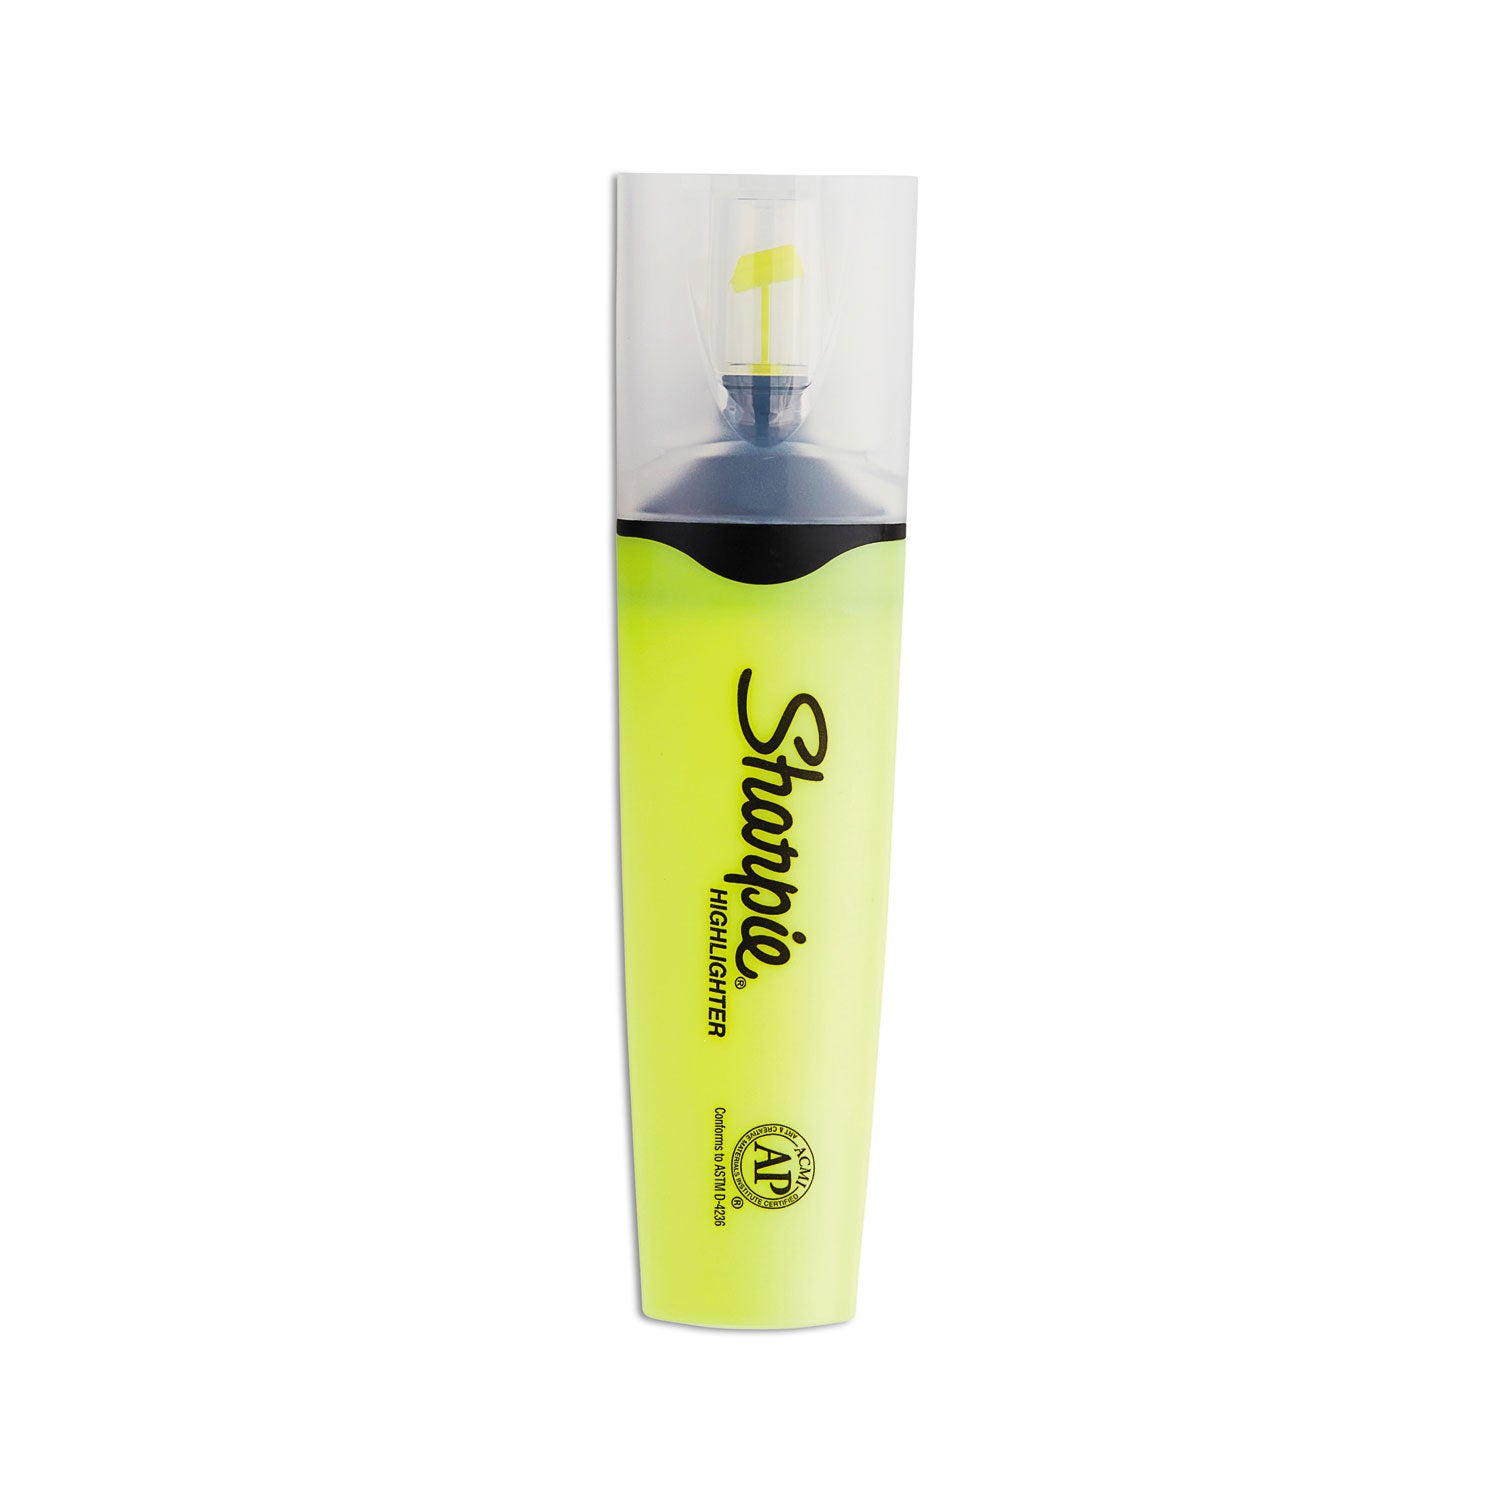 Clearview Tank-Style Highlighter, Fluorescent Yellow Ink, Chisel Tip, Yellow/Black/Clear Barrel, Dozen - 